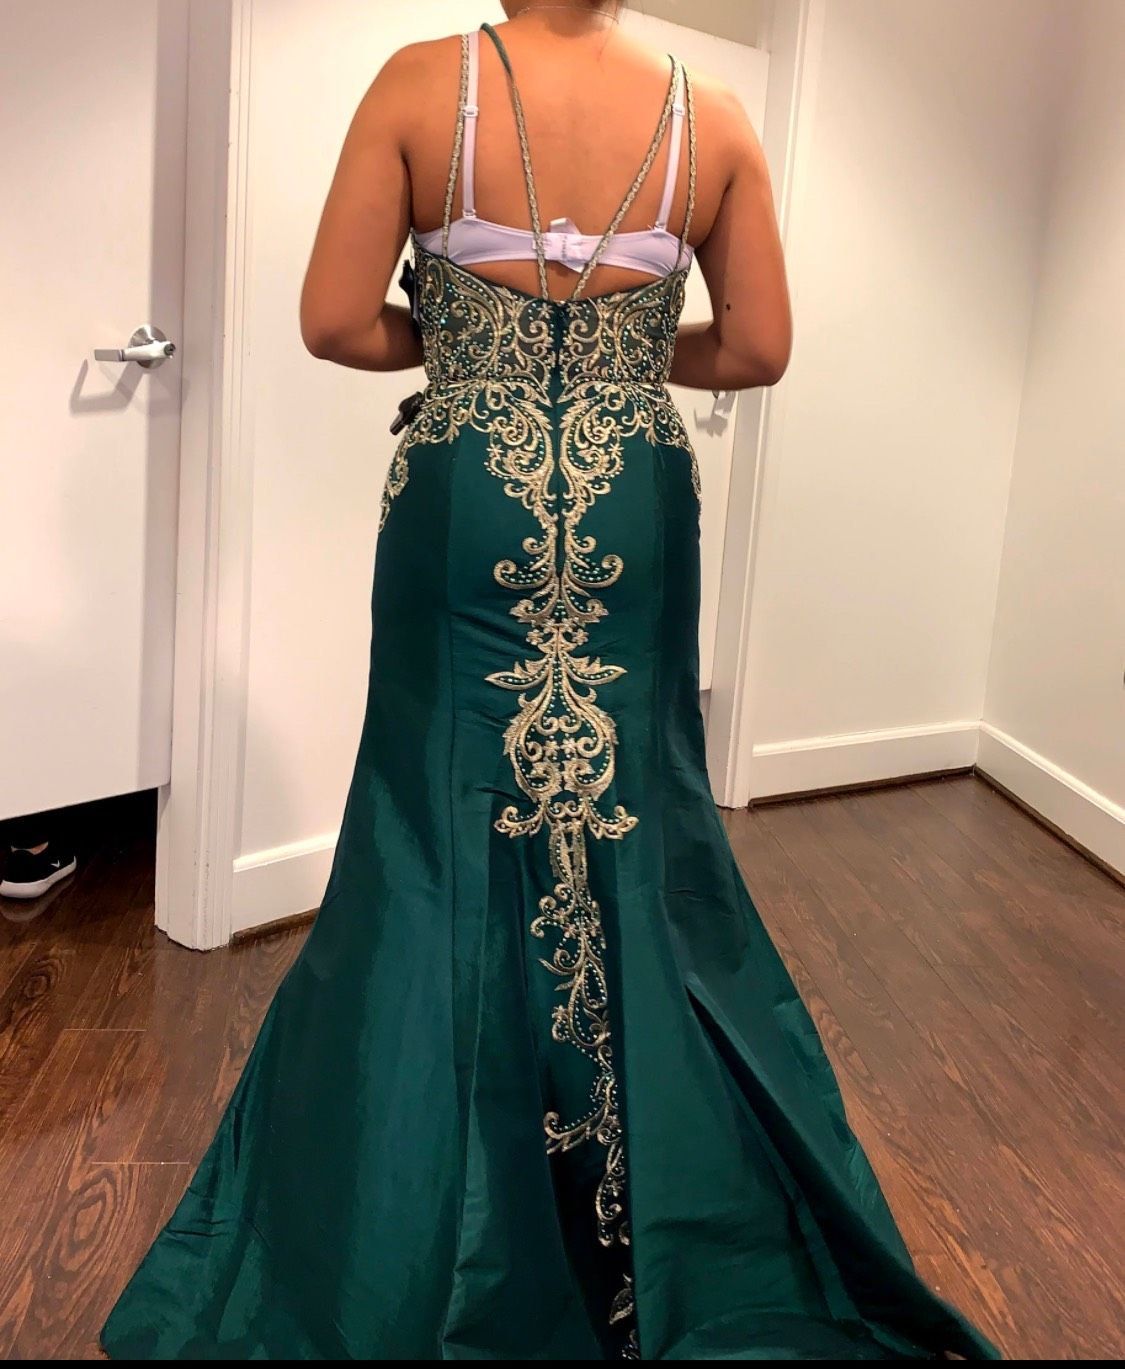 Camille La Vie Size 8 Prom Emerald Green A-line Dress on Queenly